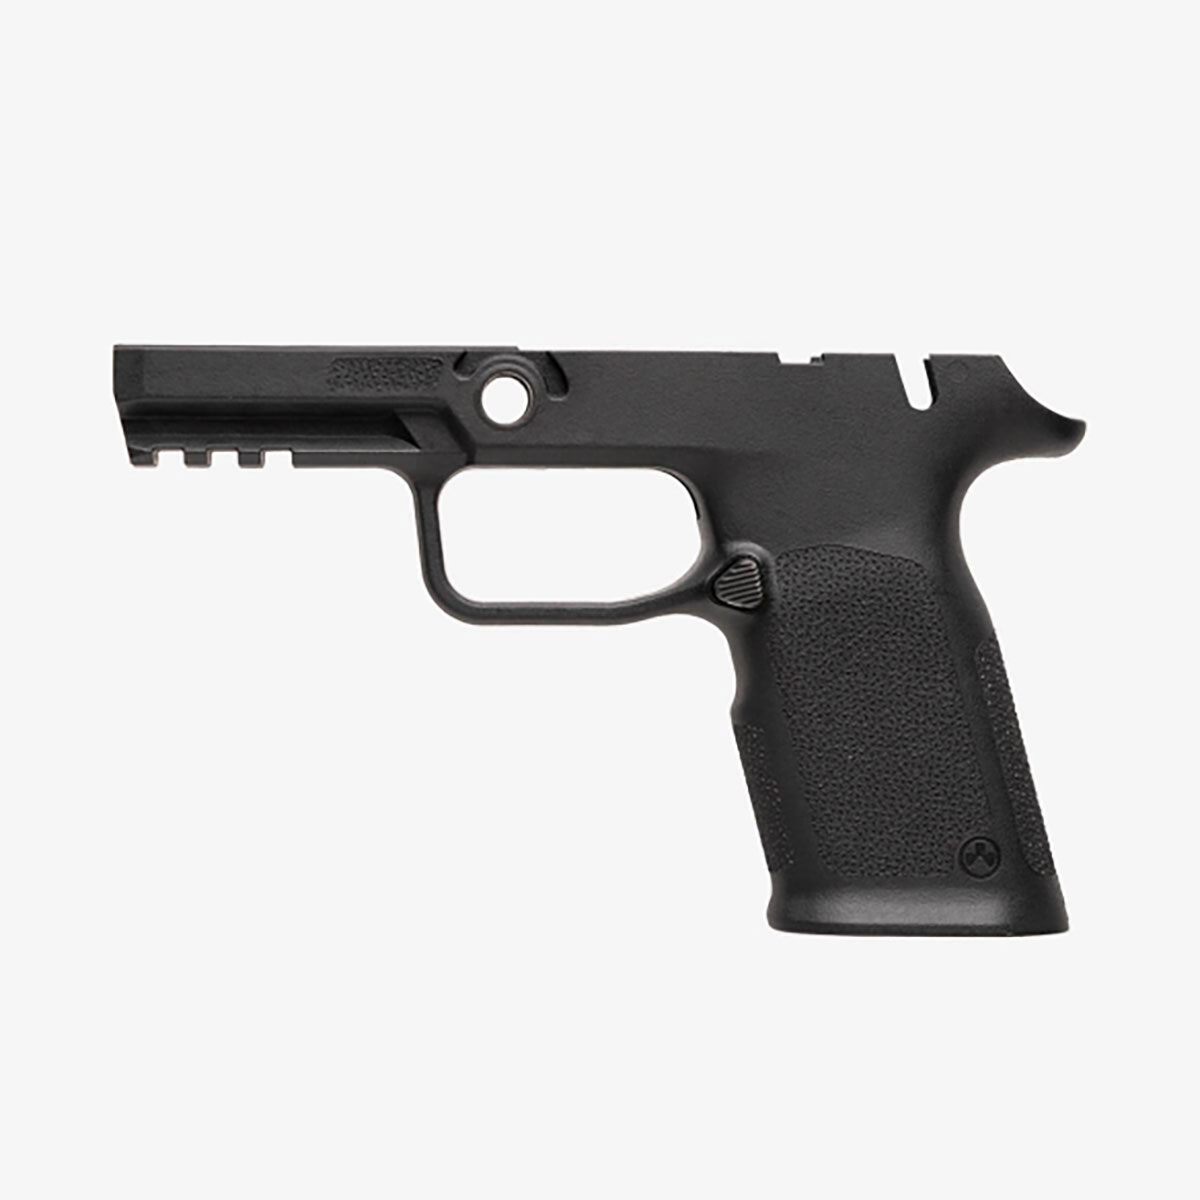 MAGPUL - SIG P320 FULL SIZE EHG SG9 GRIP W/ MANUAL SAFETY